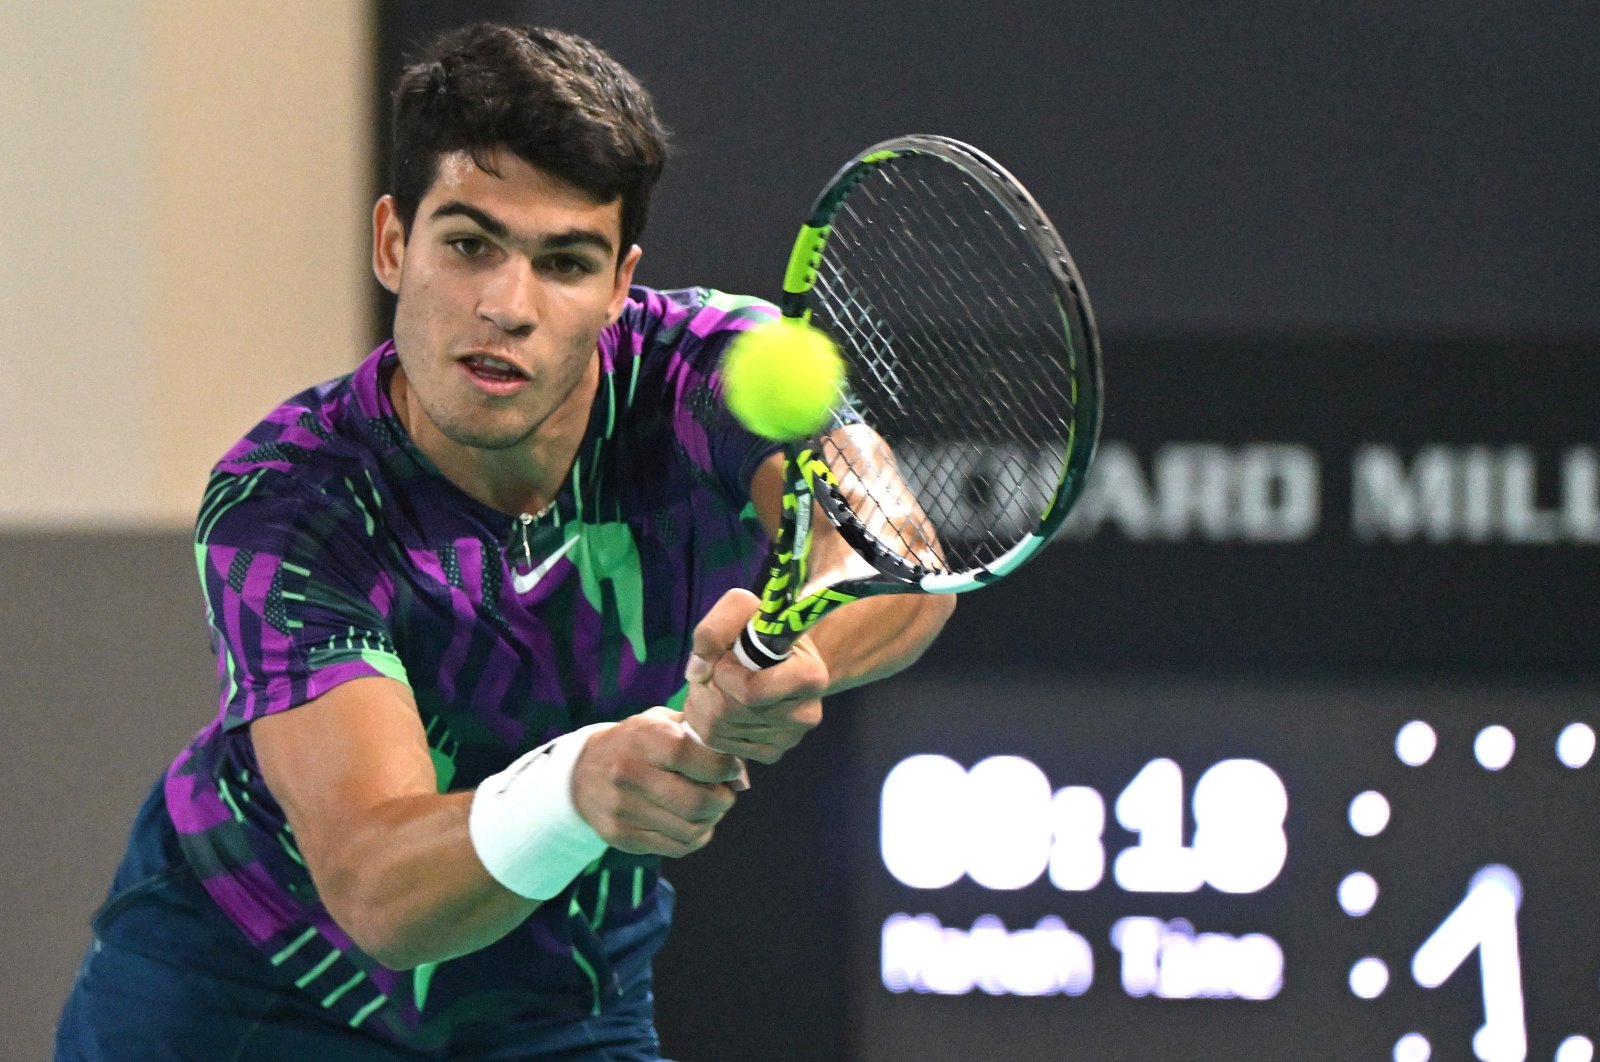 Carlos Alcaraz of Spain in action against Andrey Rublev of Russia during their match at the Mubadala World Tennis Championship exhibition tournament, Abu Dhabi, United Arab Emirates, Dec. 17, 2022. (EPA Photo)